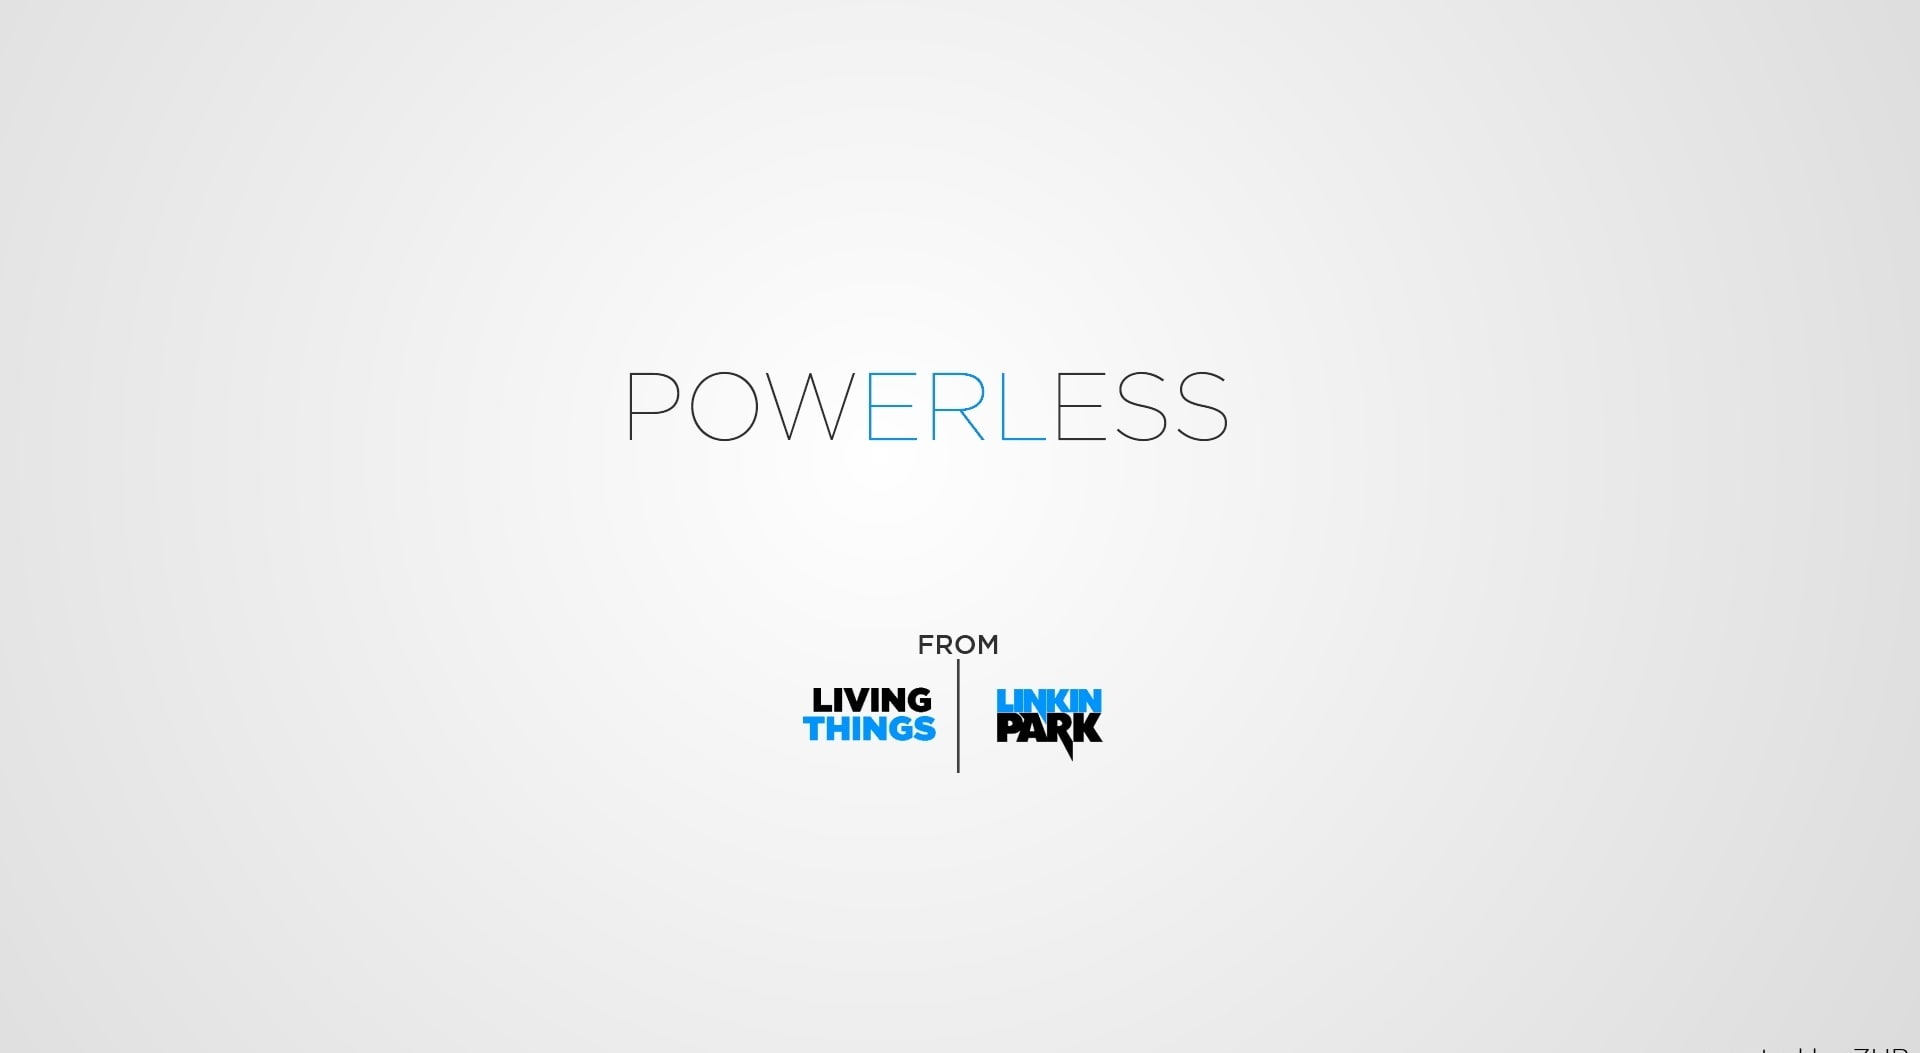 Powerless by Linkin Park, white background with text overlay